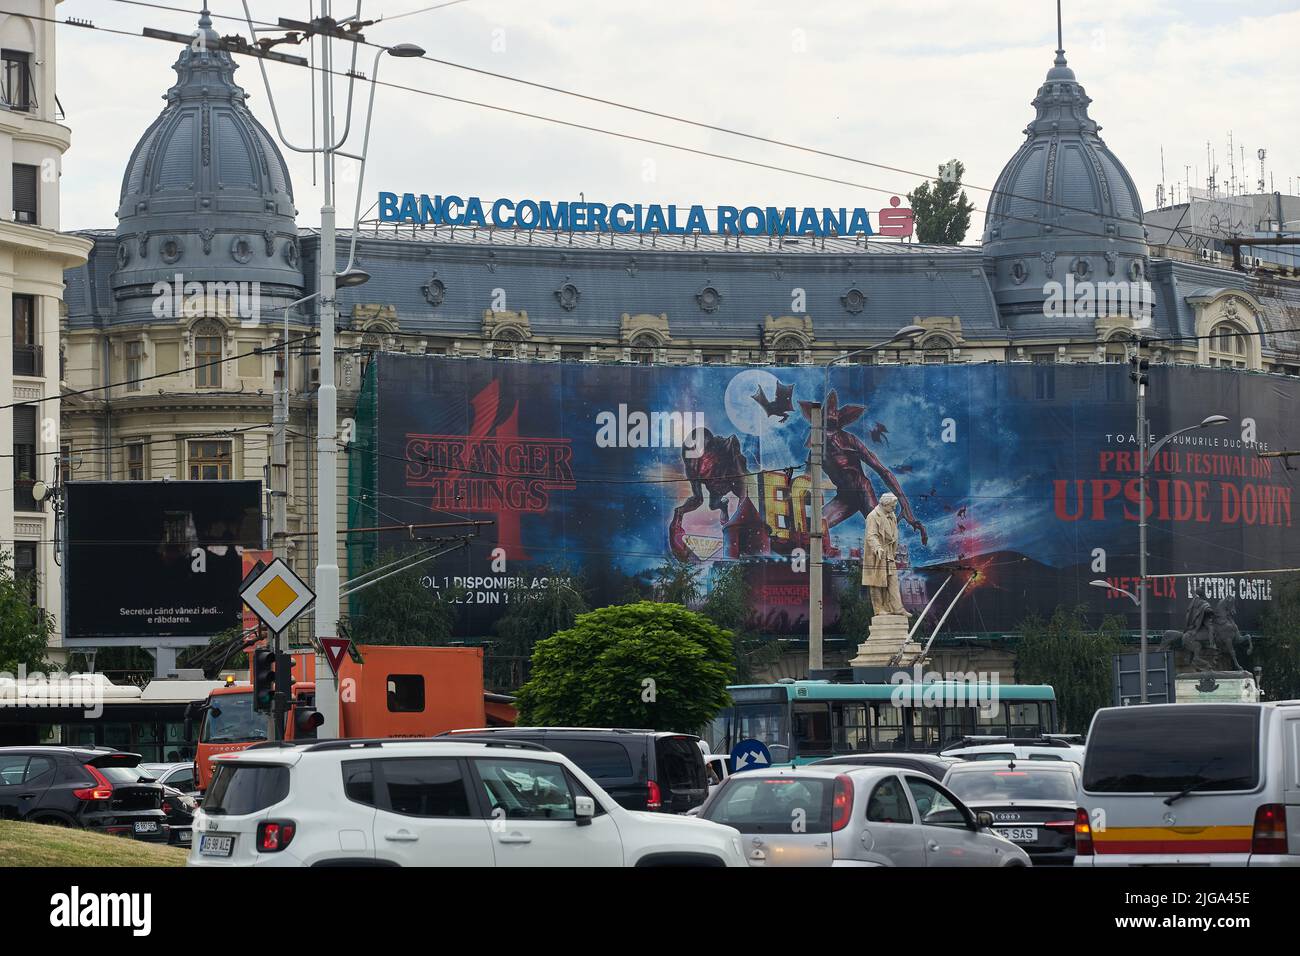 Bucharest, Romania - July 07, 2022: Extra large banner advertising Stranger Things season 4 displayed on Oscar Maugsch Palace, Romanian Commercial Ban Stock Photo